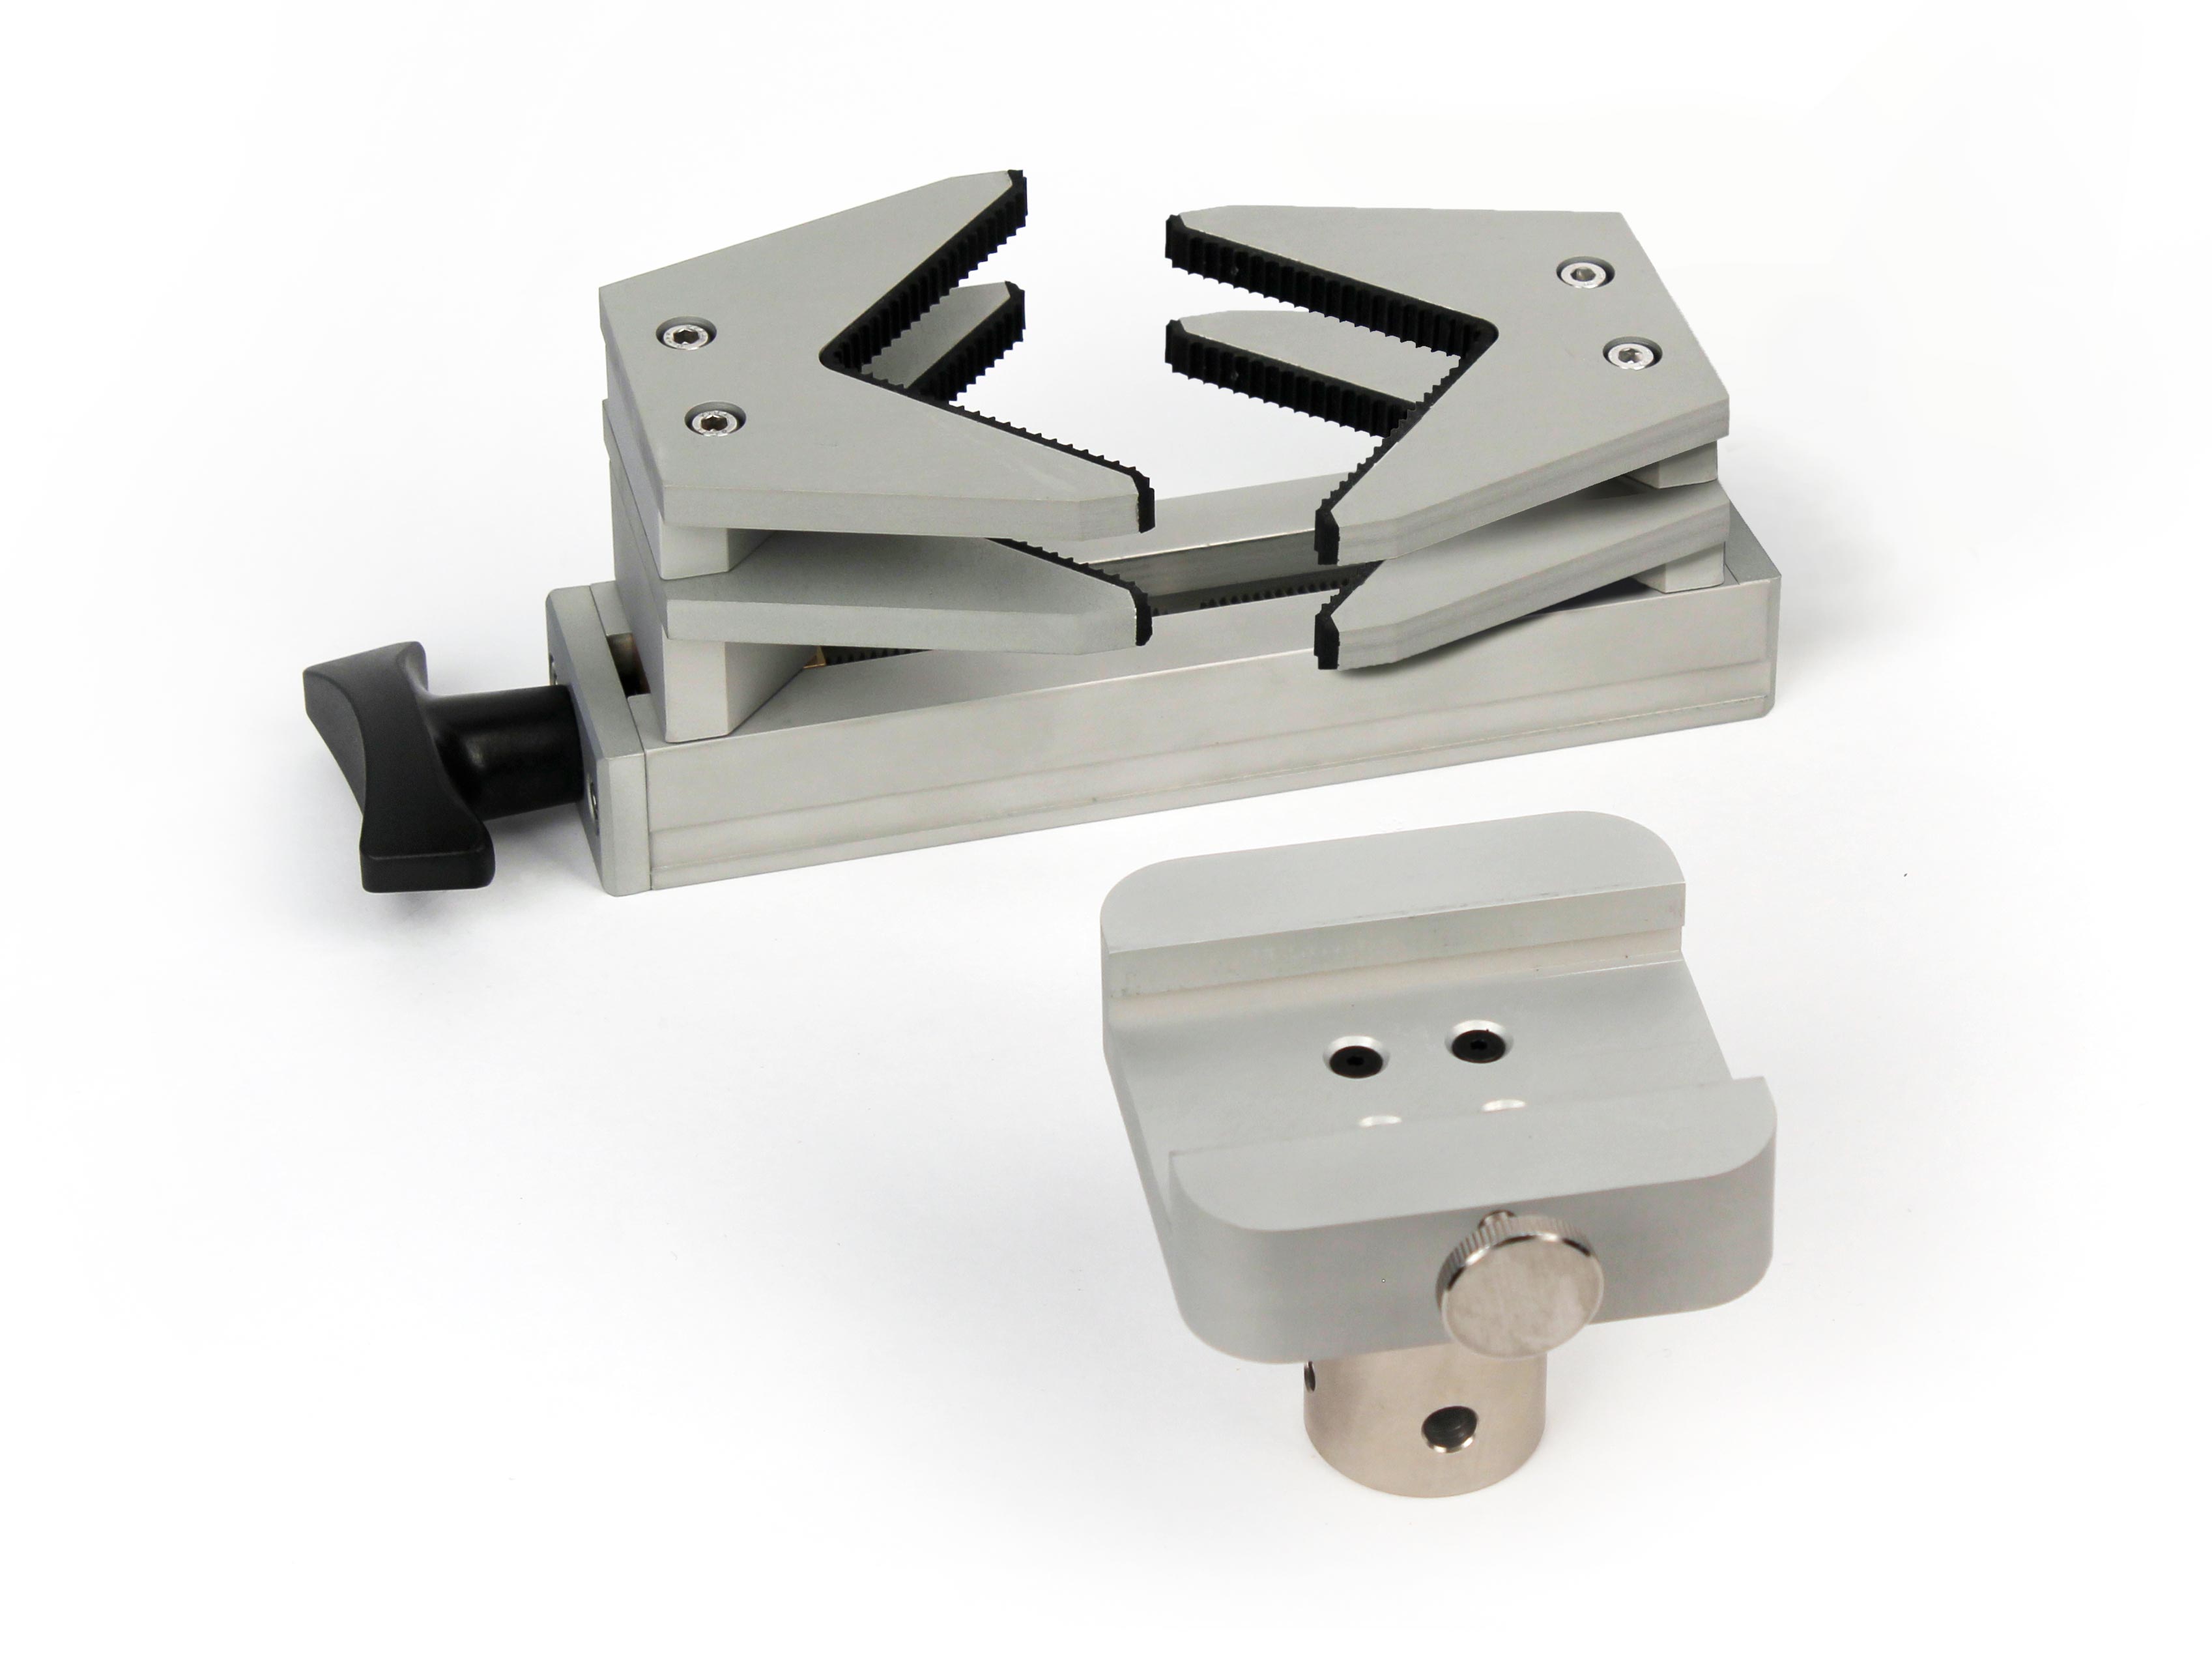 V-jaw vice clamp grips low-friction plastic surfaces for accurate force testing